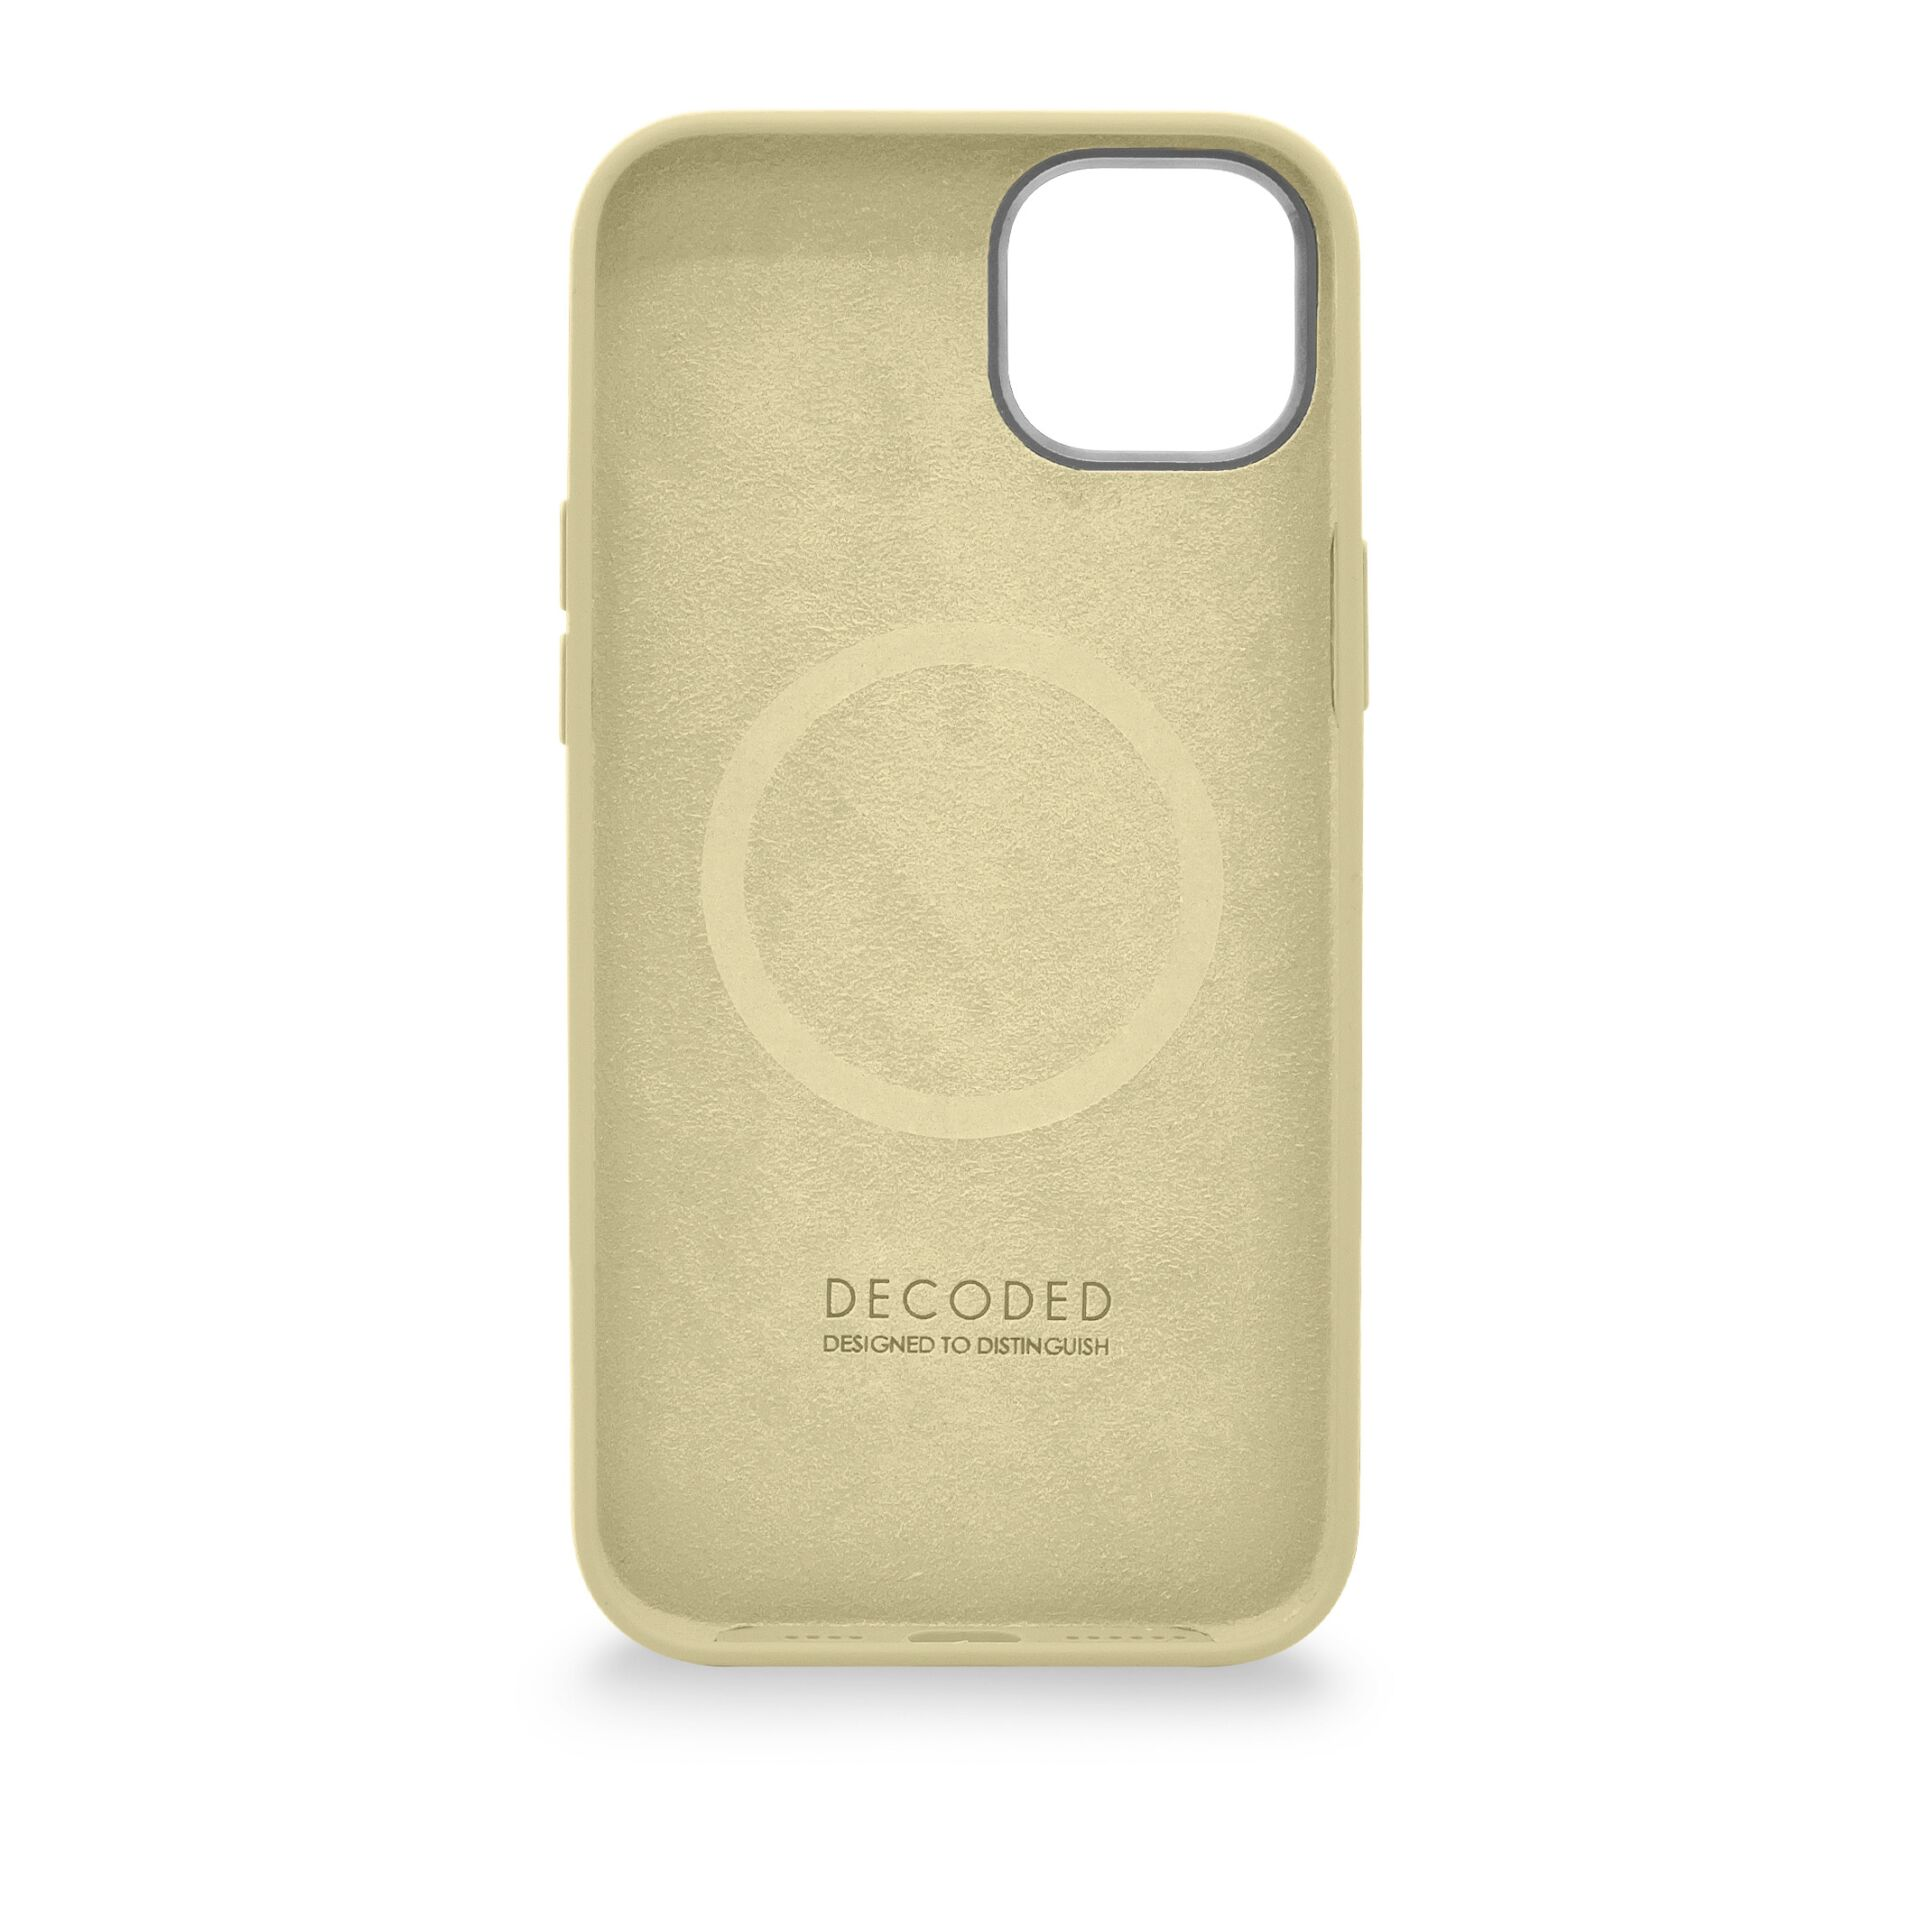 Corn, DECODED AntiMicrobial Silicone Backcover Sweet iPhone Corn 14, Backcover, Apple,